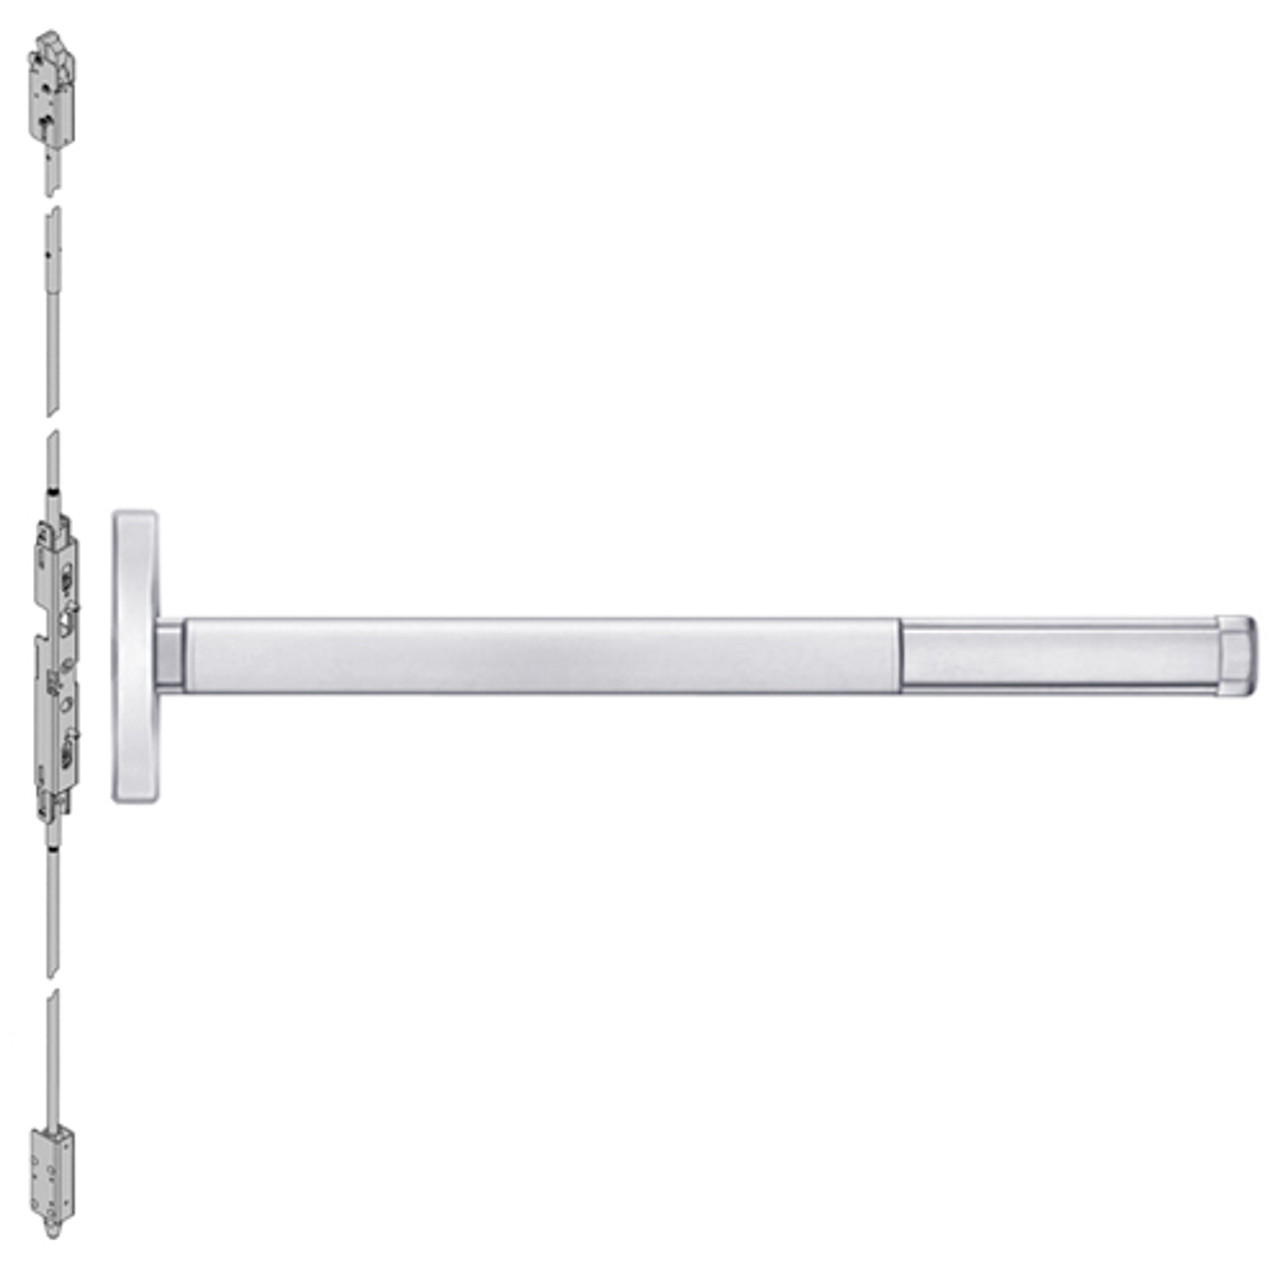 ELR2601LBR-625-36 PHI 2600 Series Concealed Vertical Rod Exit Device with Electric Latch Retraction Prepped for Cover Plate in Bright Chrome Finish